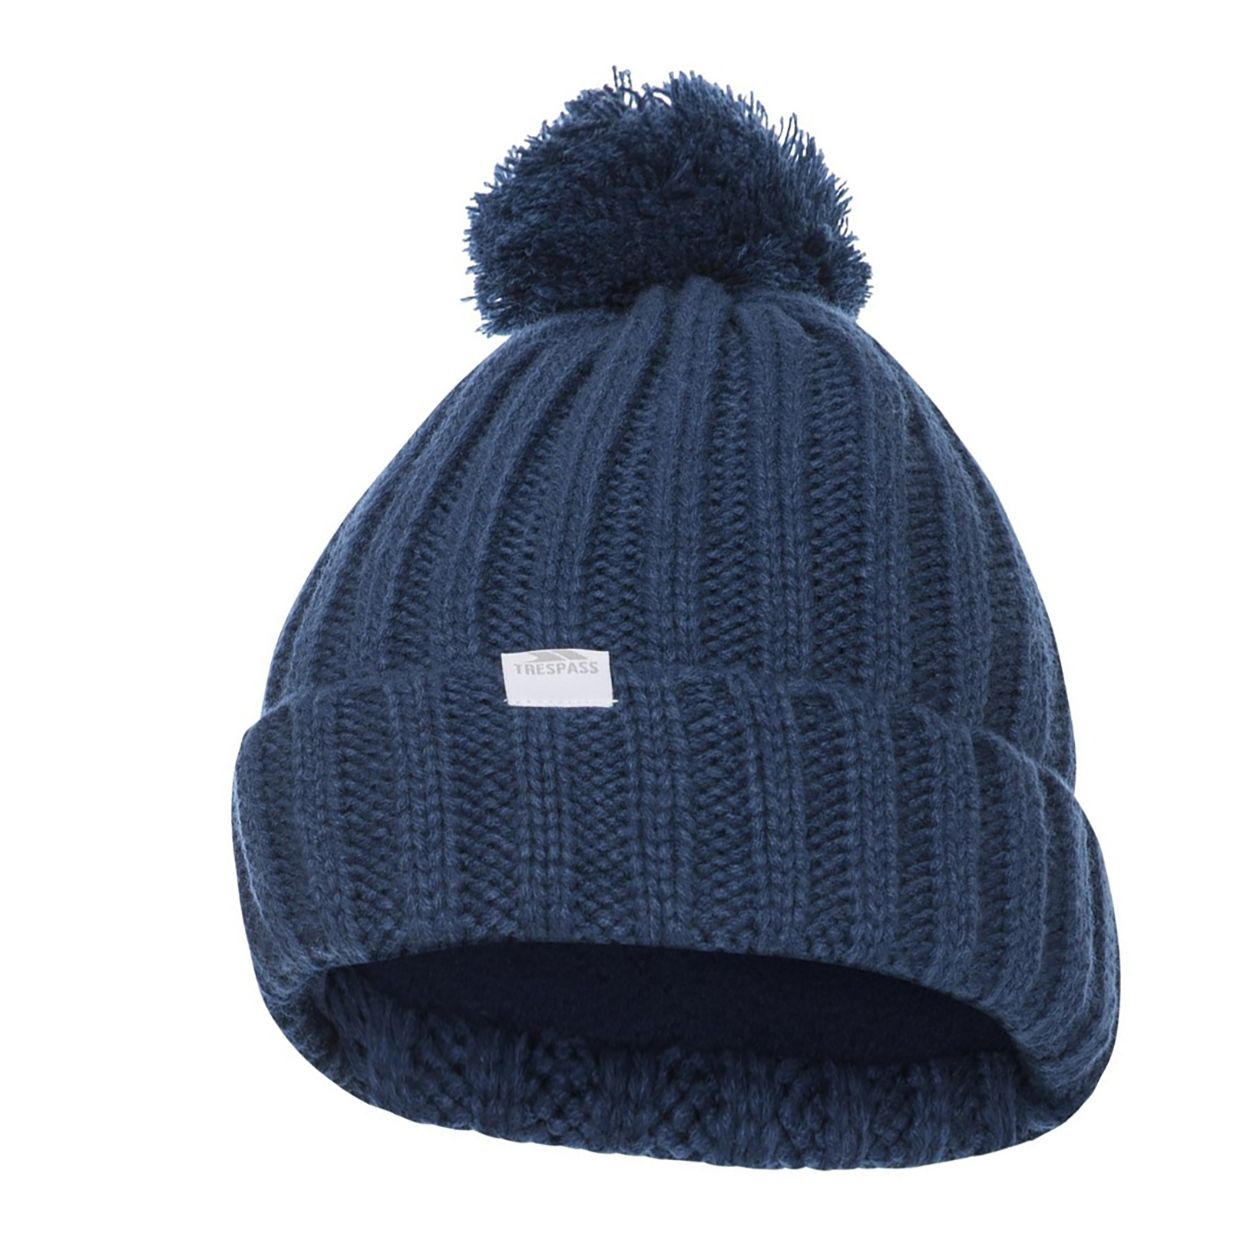 Knitted hat with pom pom. Fully fleece lined. Woven label. Outer: 100% Acrylic, Lining: 100% Polyester anti pil fleece.